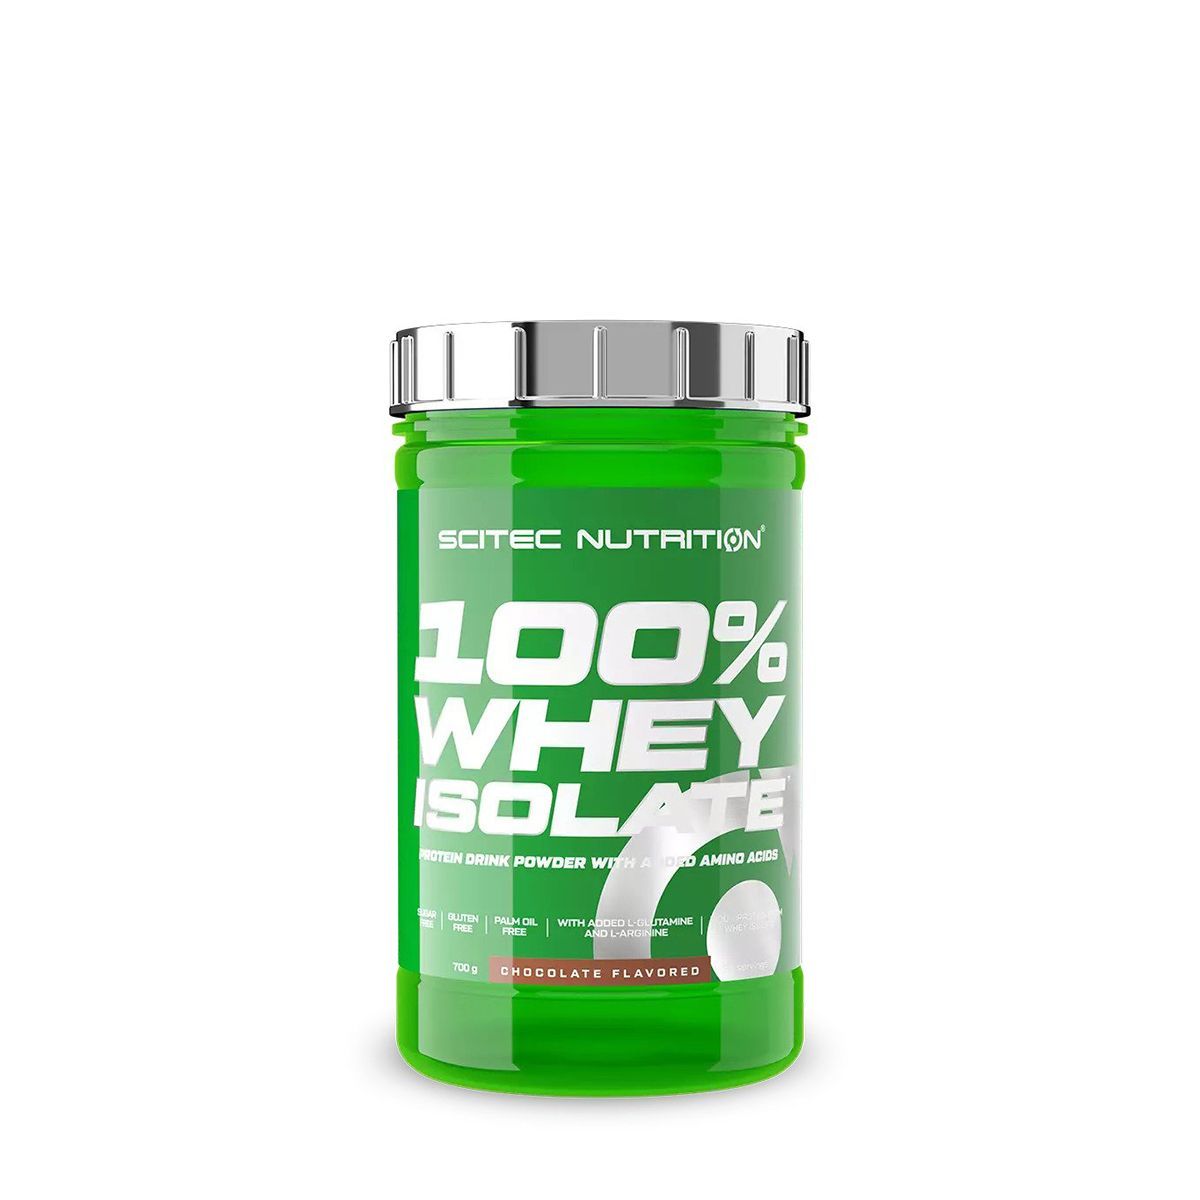 Scitec Nutrition - 100% Whey Isolate - 700g